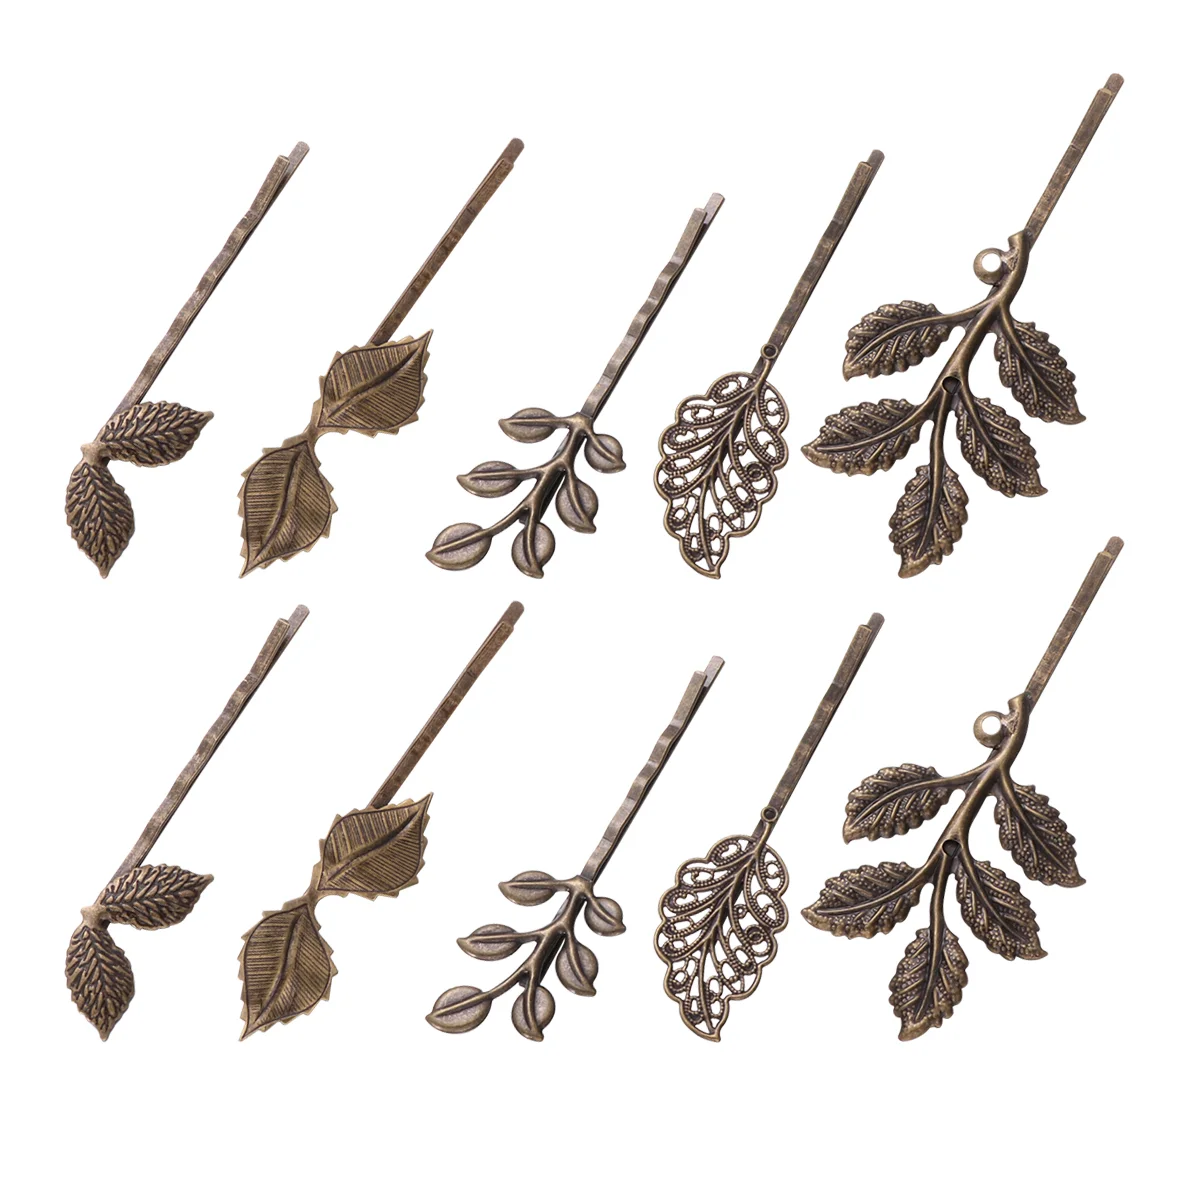 

Bronze Leaf Hairclip Bobby Vintage Barrettes Clips Hairpin Minimalist Retro Forpin Accessories French Metal Hairpins Leaves